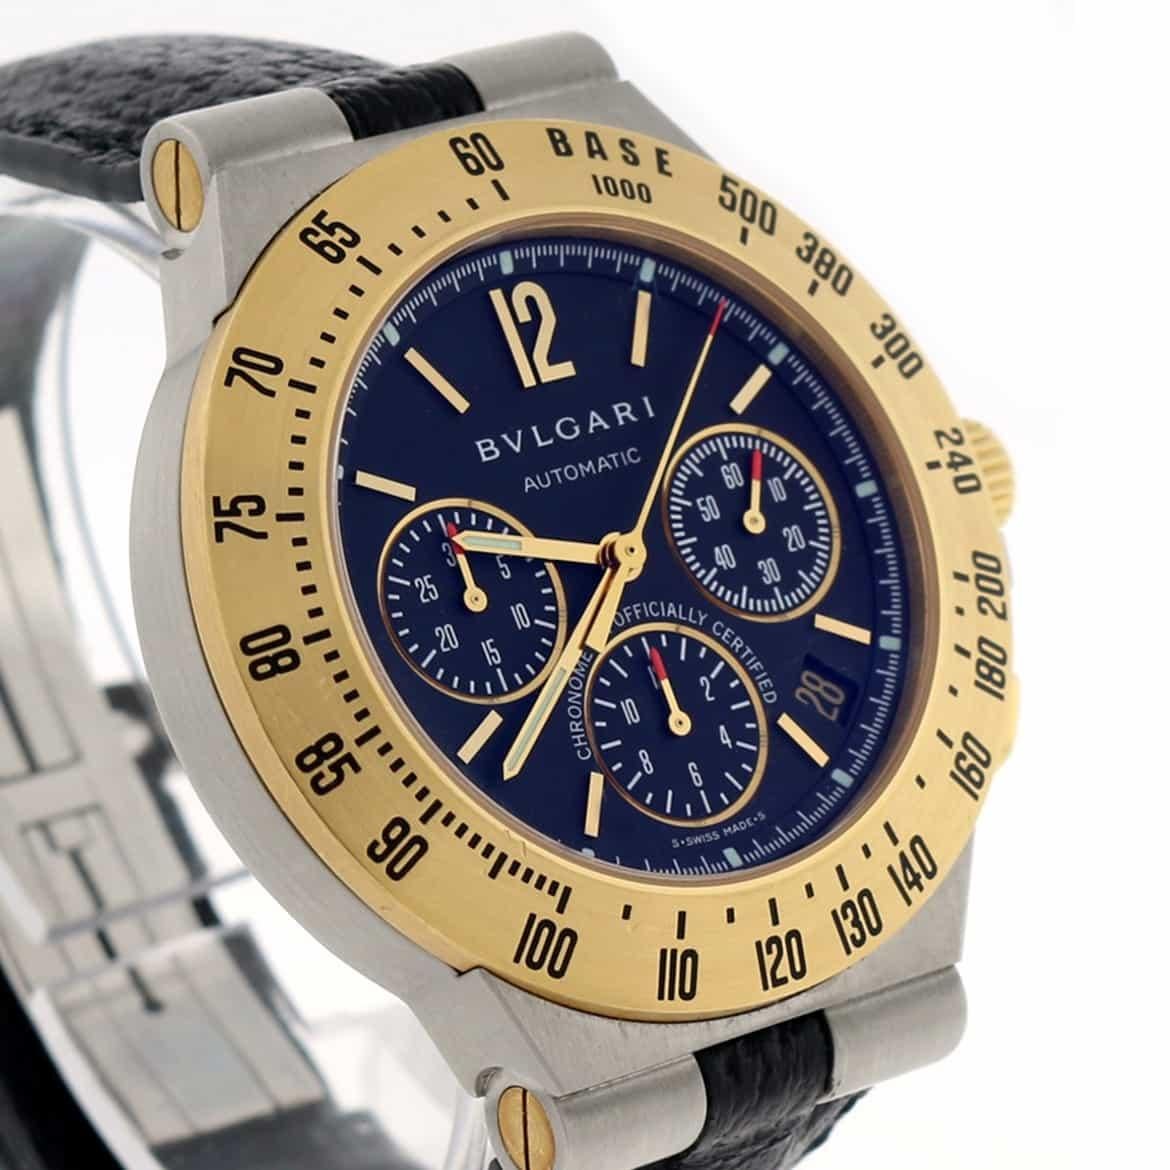 Bvlgari Diagono Chronograph 2-Tone 18 Karat Gold and Stainless Steel Watch In Excellent Condition For Sale In New York, NY